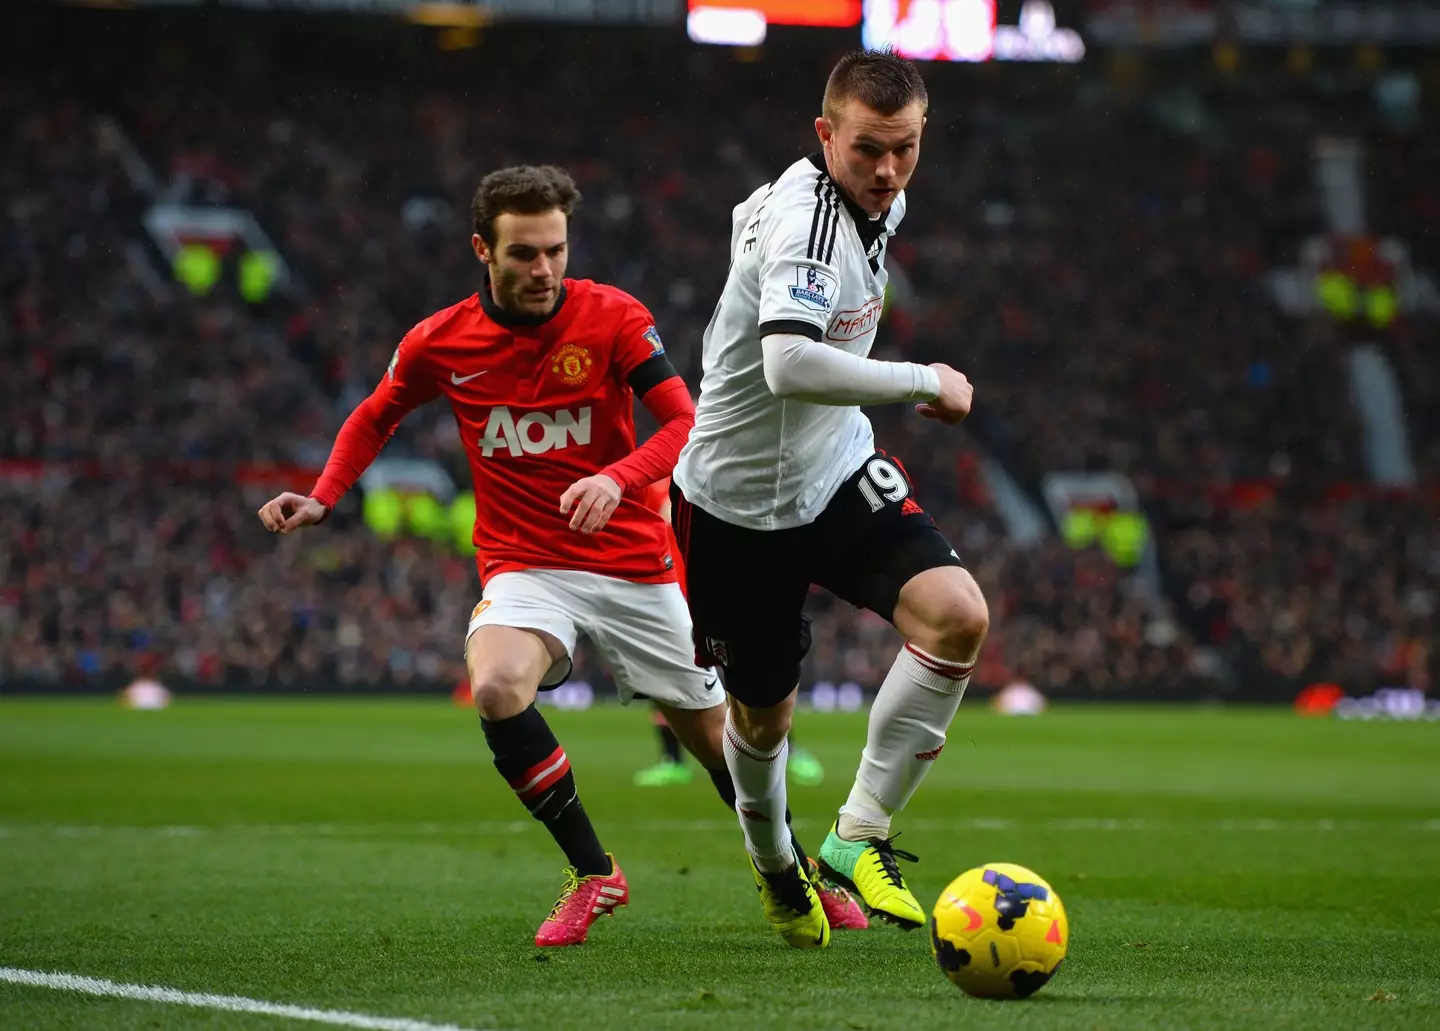 Tunnicliffe playing for Fulham against United in 2014. (Image